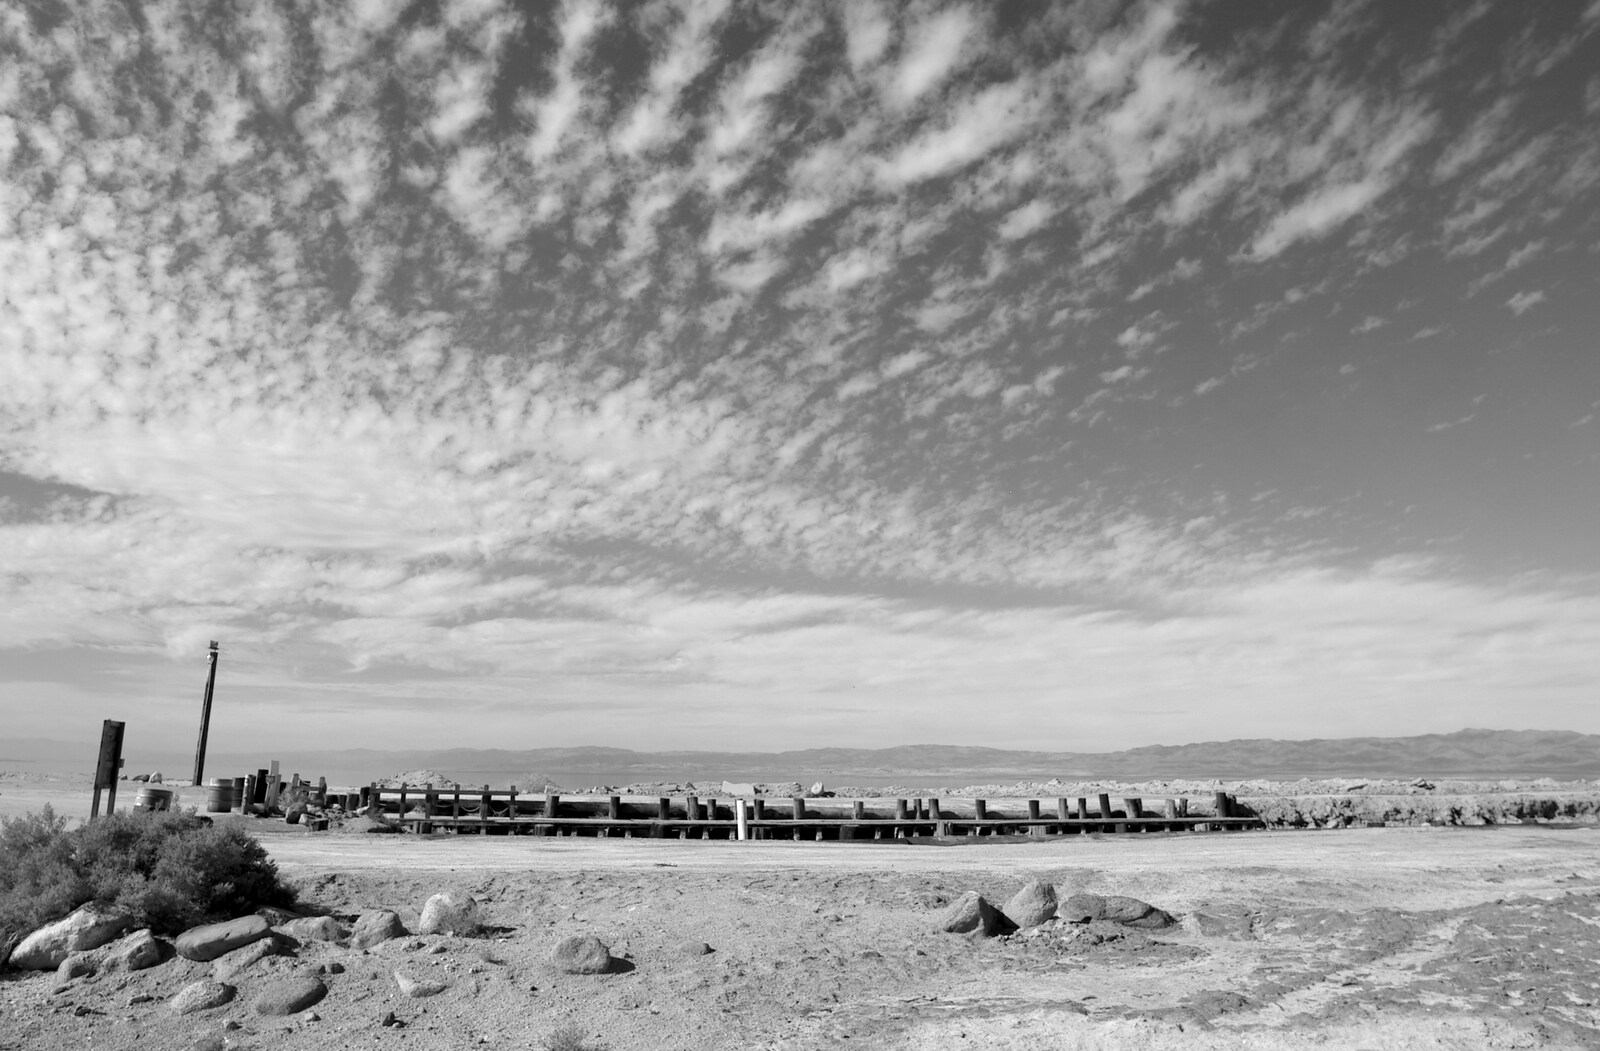 The pier in black and white from California Desert 2: The Salton Sea and Anza-Borrego to Julian, California, US - 24th September 2005